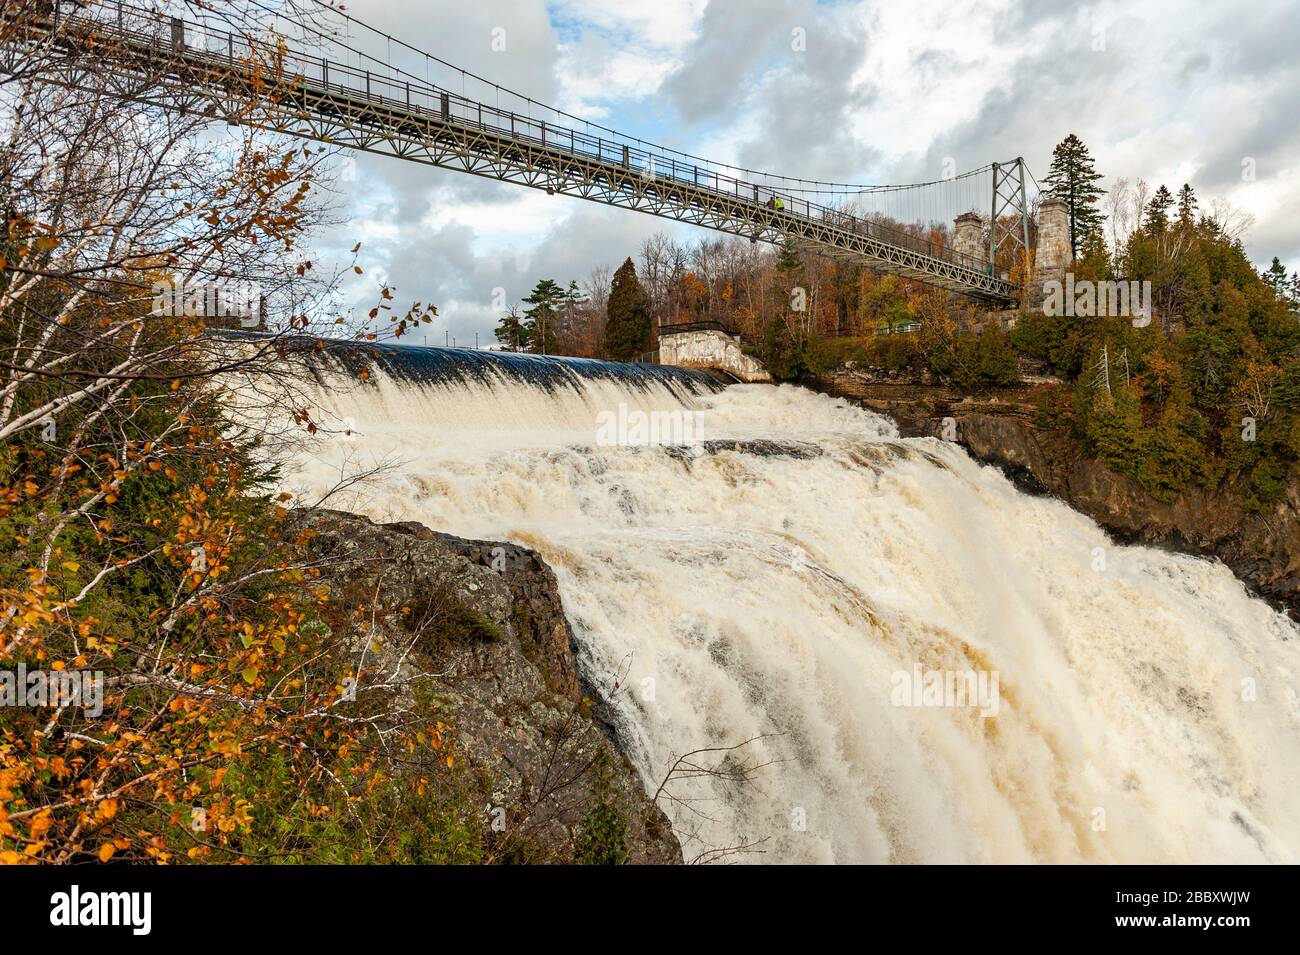 Quebec, Montmorency Falls (Chute Montmorency), Montmorency Falls Park (Parc de la Chute-Montmorency) in autunno, Quebec City, Canada. Foto Stock